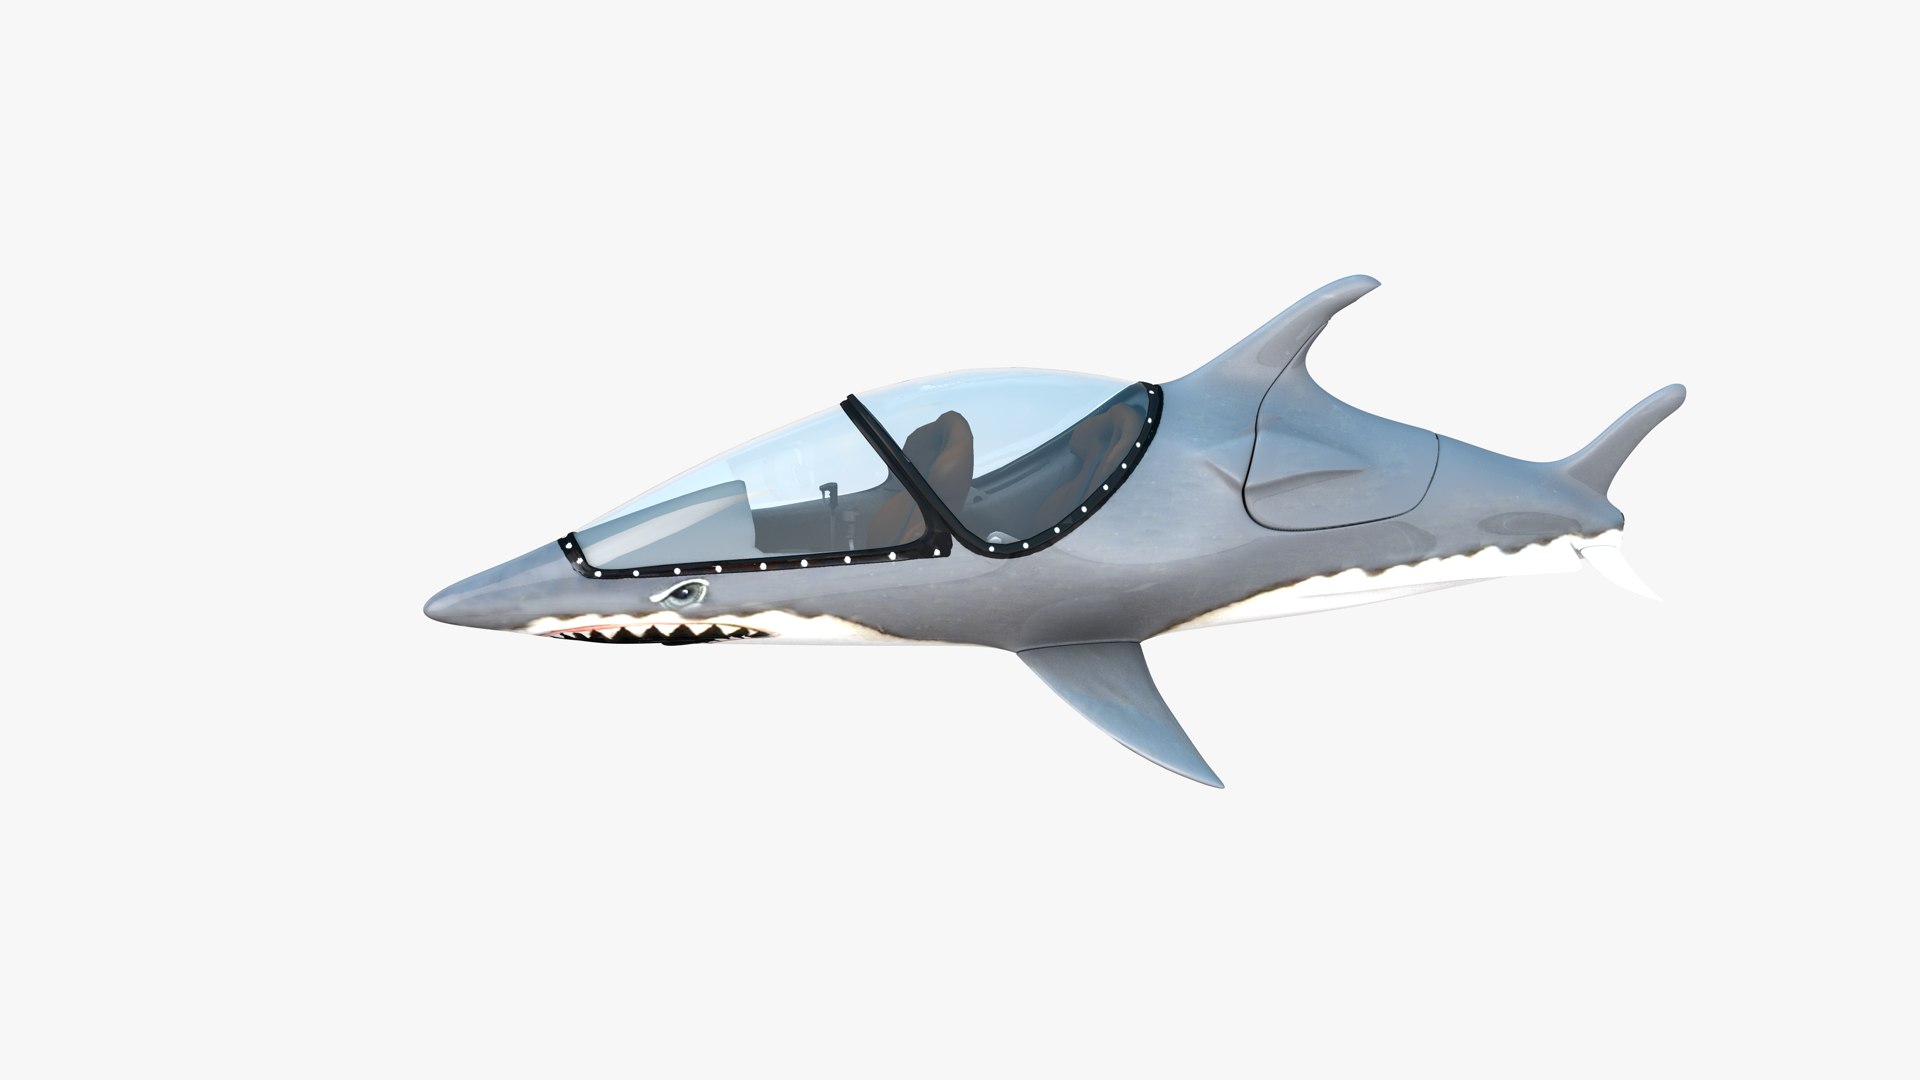 The Seabreacher submarine Fighter Jet is the best way to spend £71,000